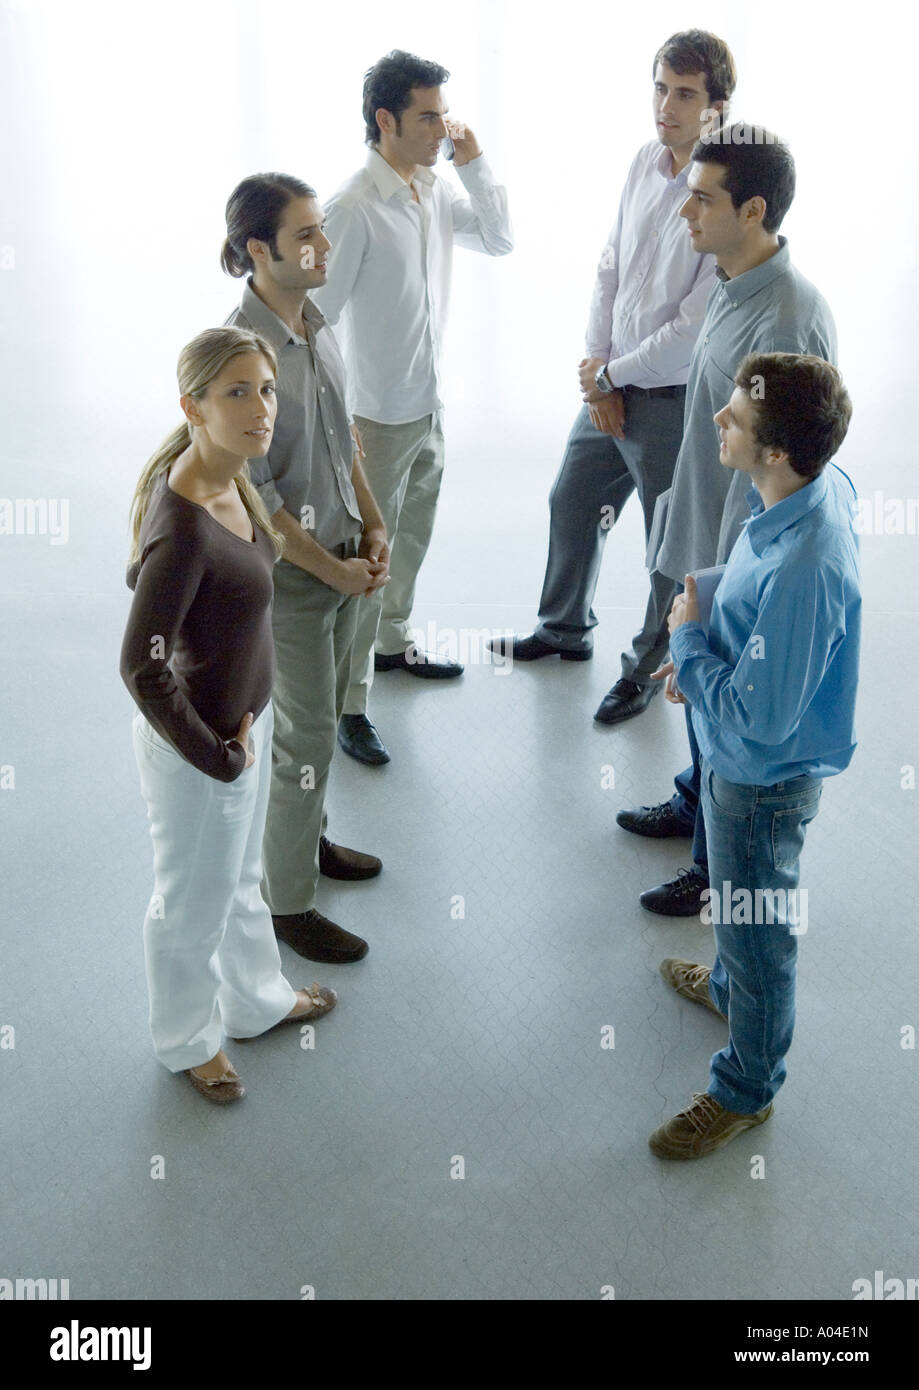 Informal business discussion among six young professionals, high angle full length view Stock Photo